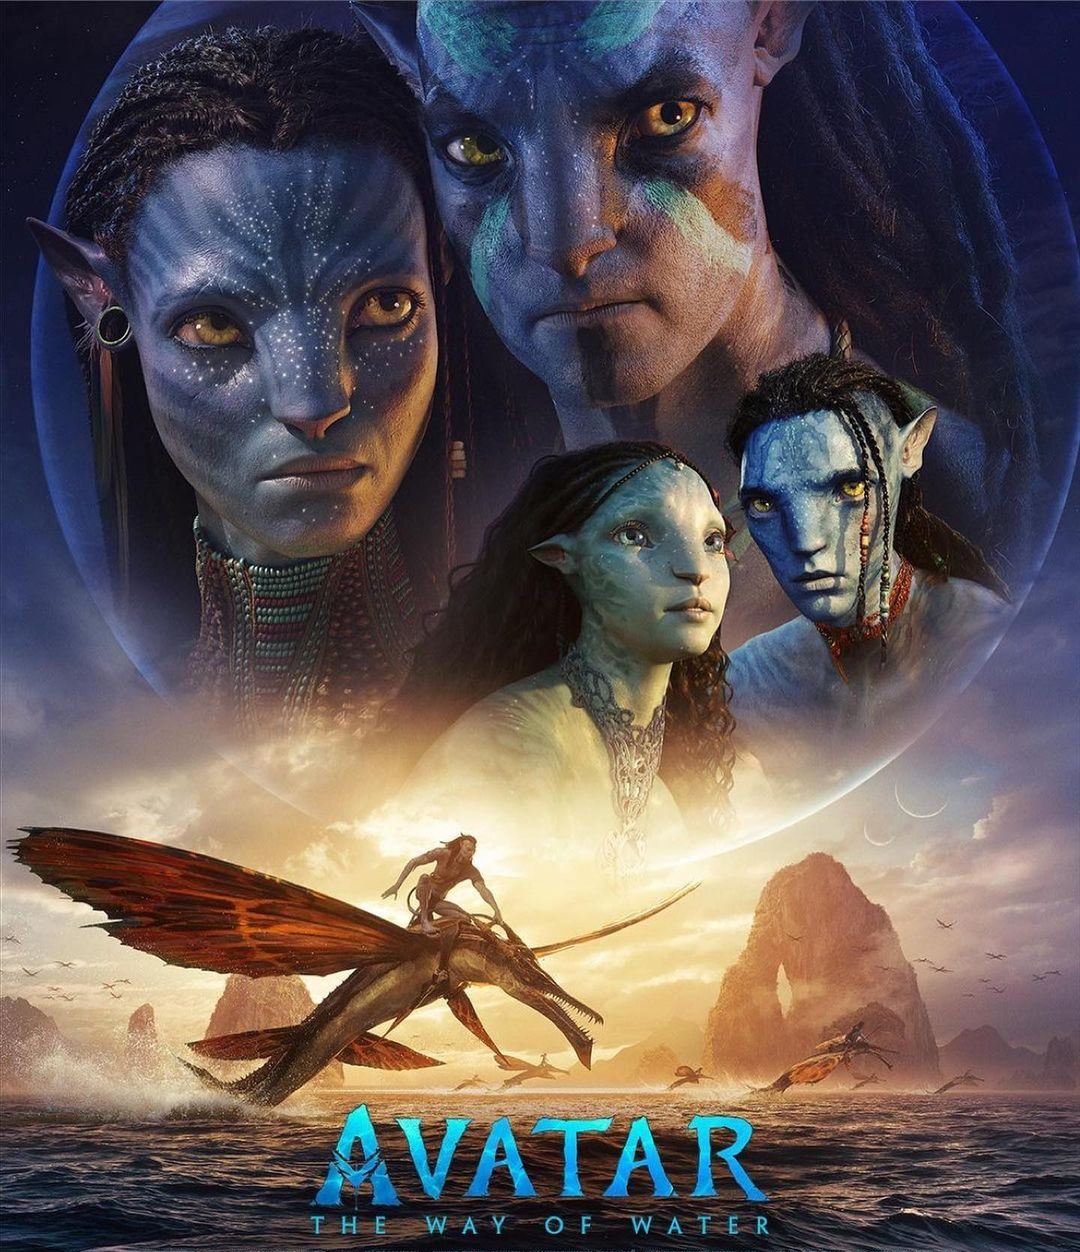 boxofficebusiness.in - Avatar 2 Way of Water